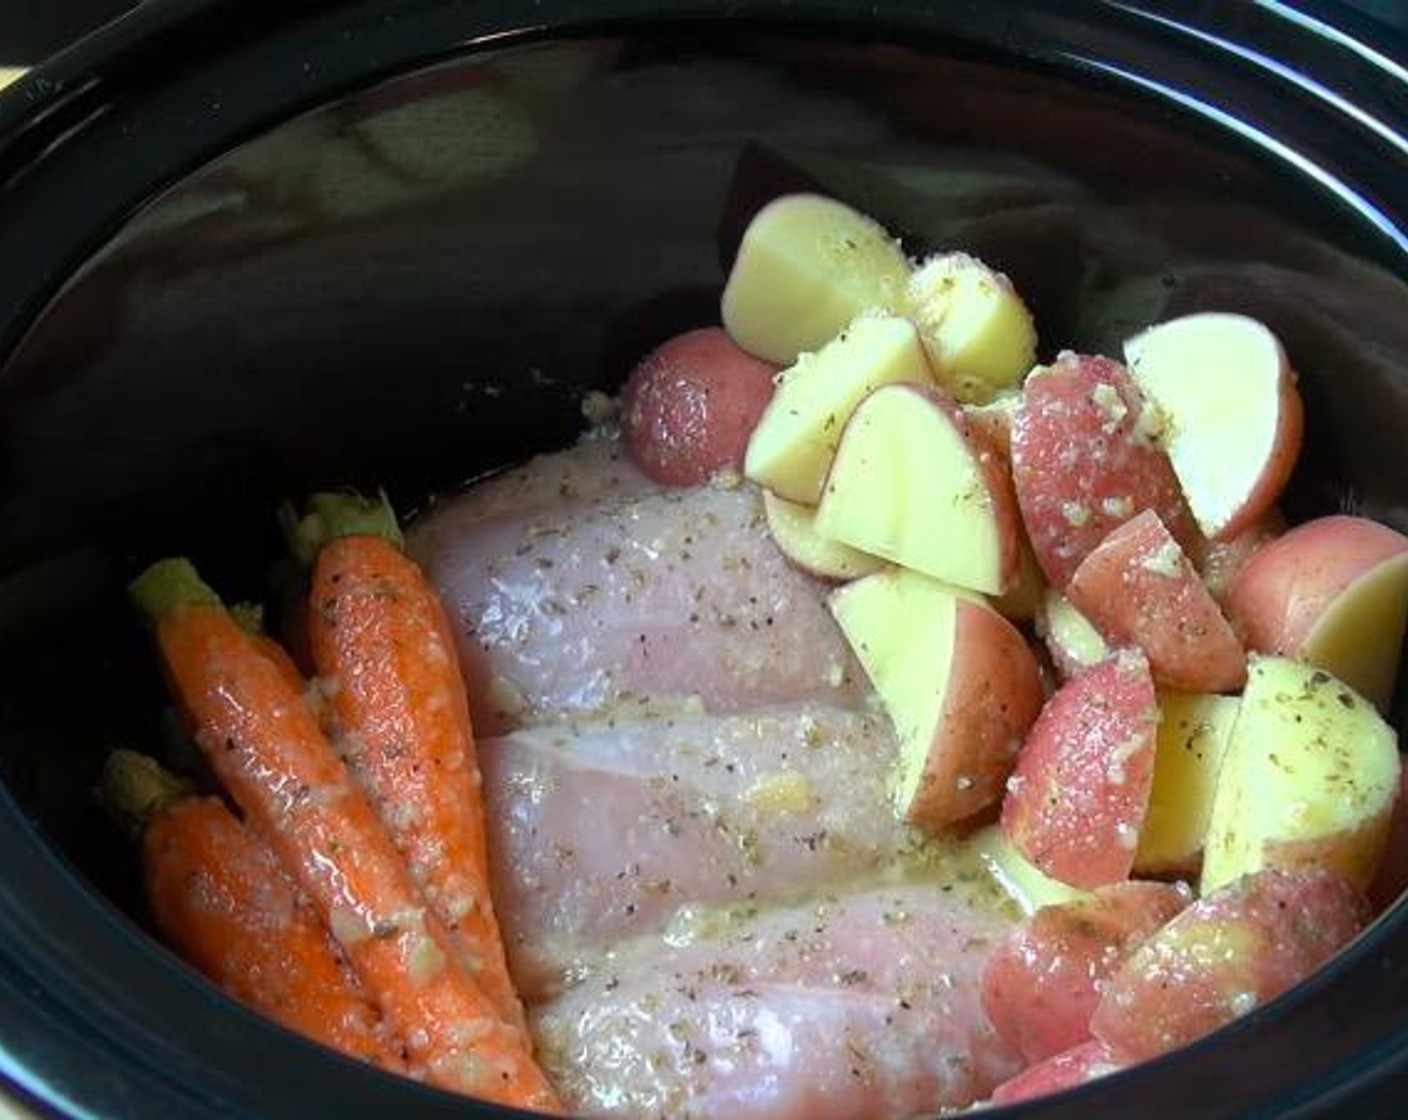 step 2 In a slow cooker, add Chicken Breasts (2.2 lb), Red Potatoes (4 cups) and Baby Carrots (2 cups). Pour the marinade mixture over everything. Cover and cook on high for 4 hours, or on low for 8 hours.